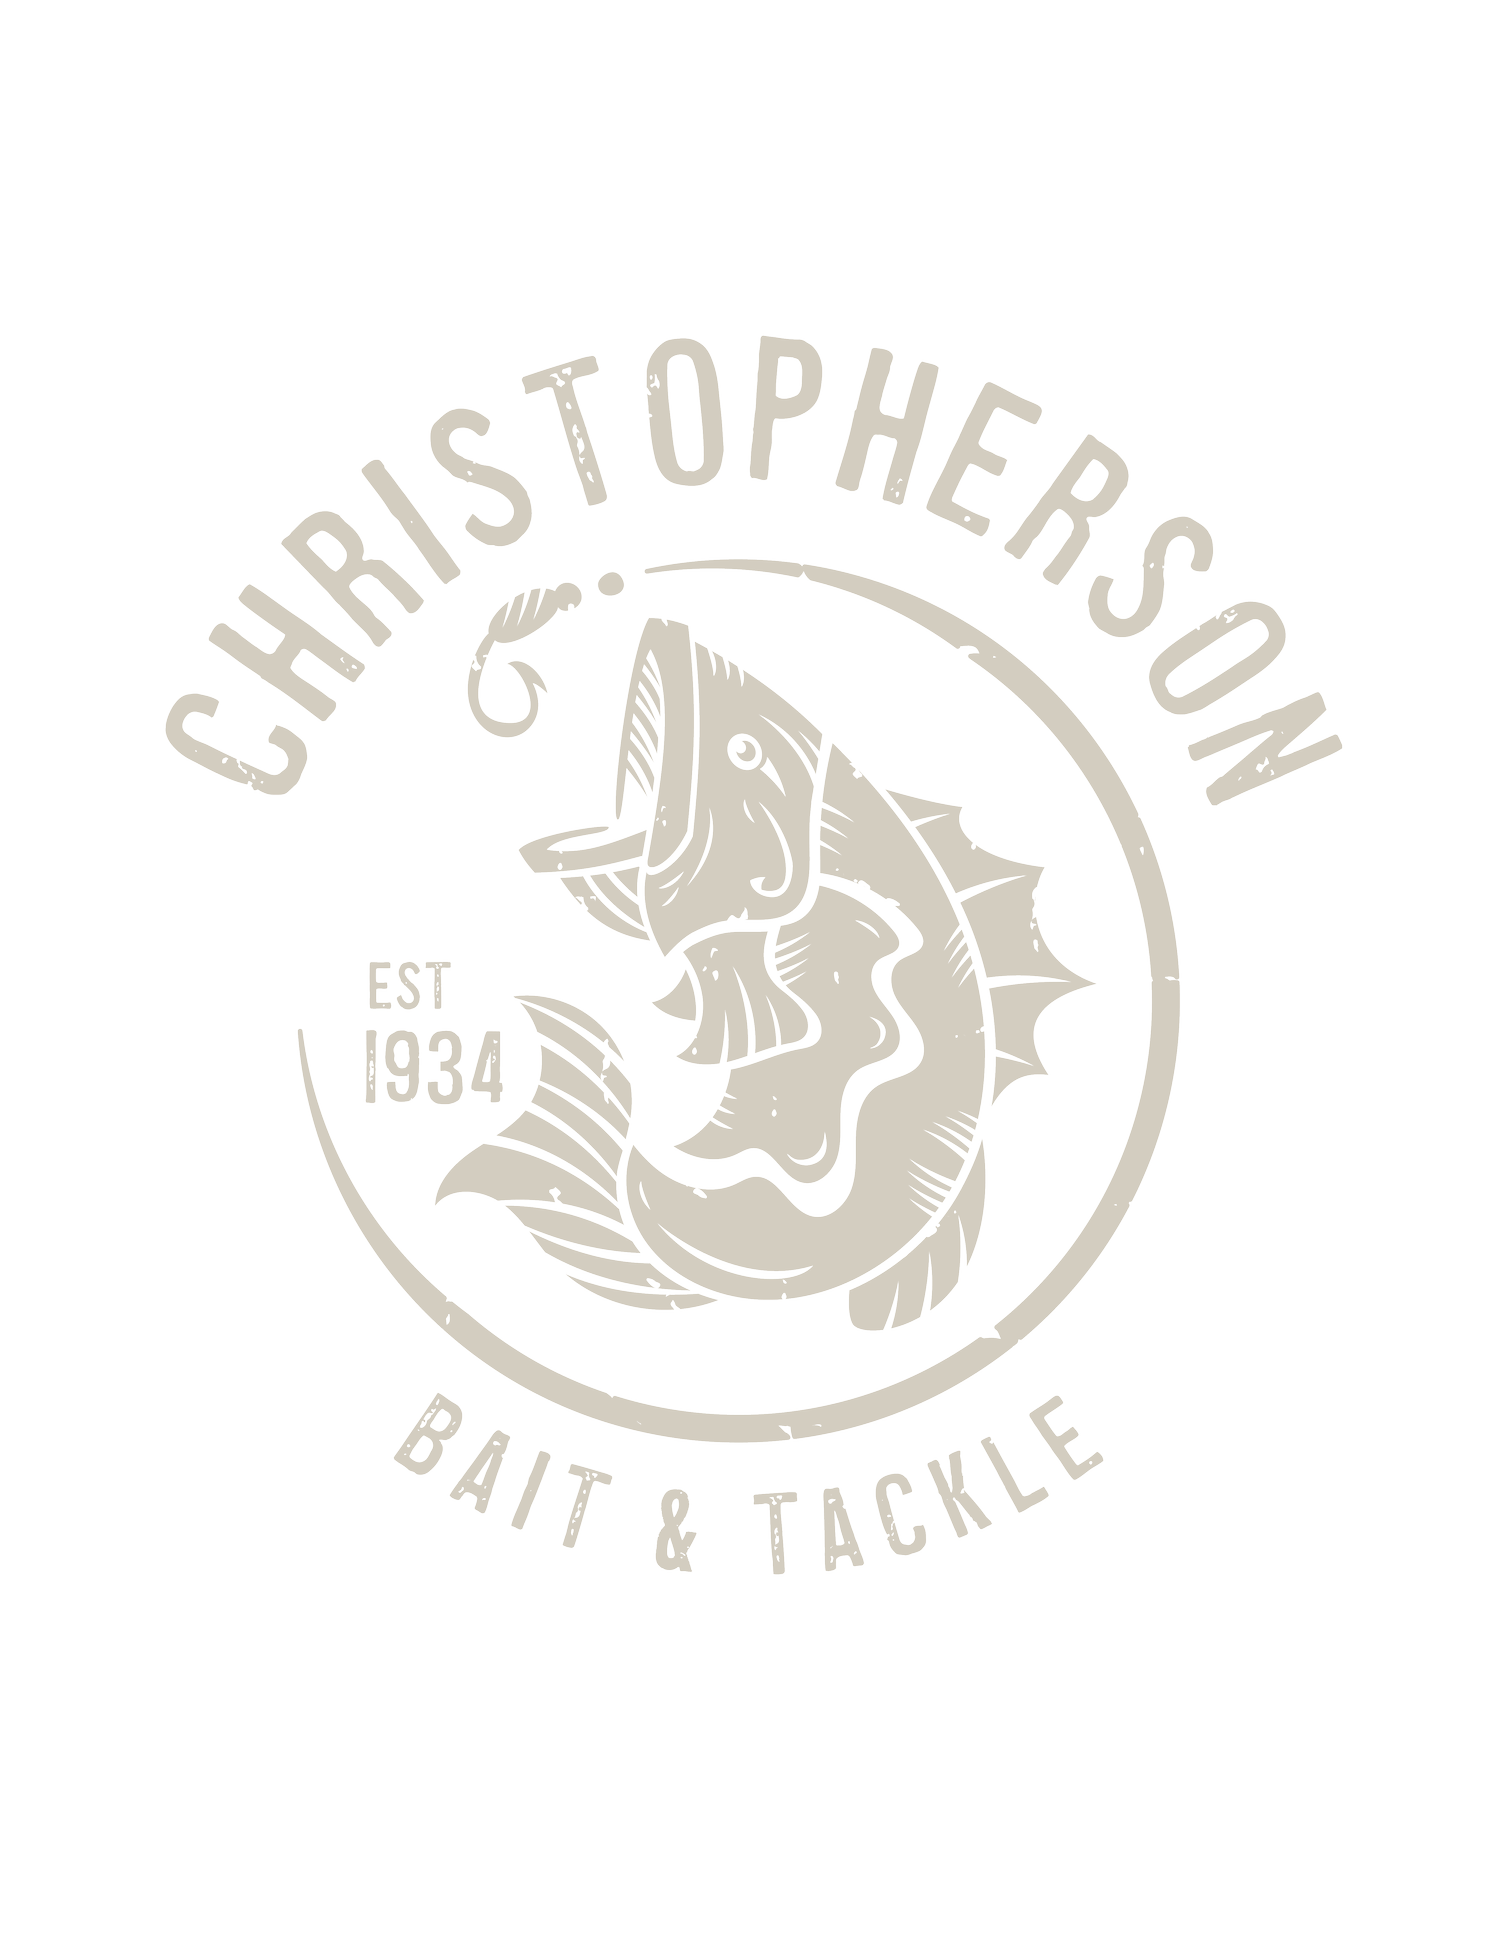 Christopherson Bait and Tackle